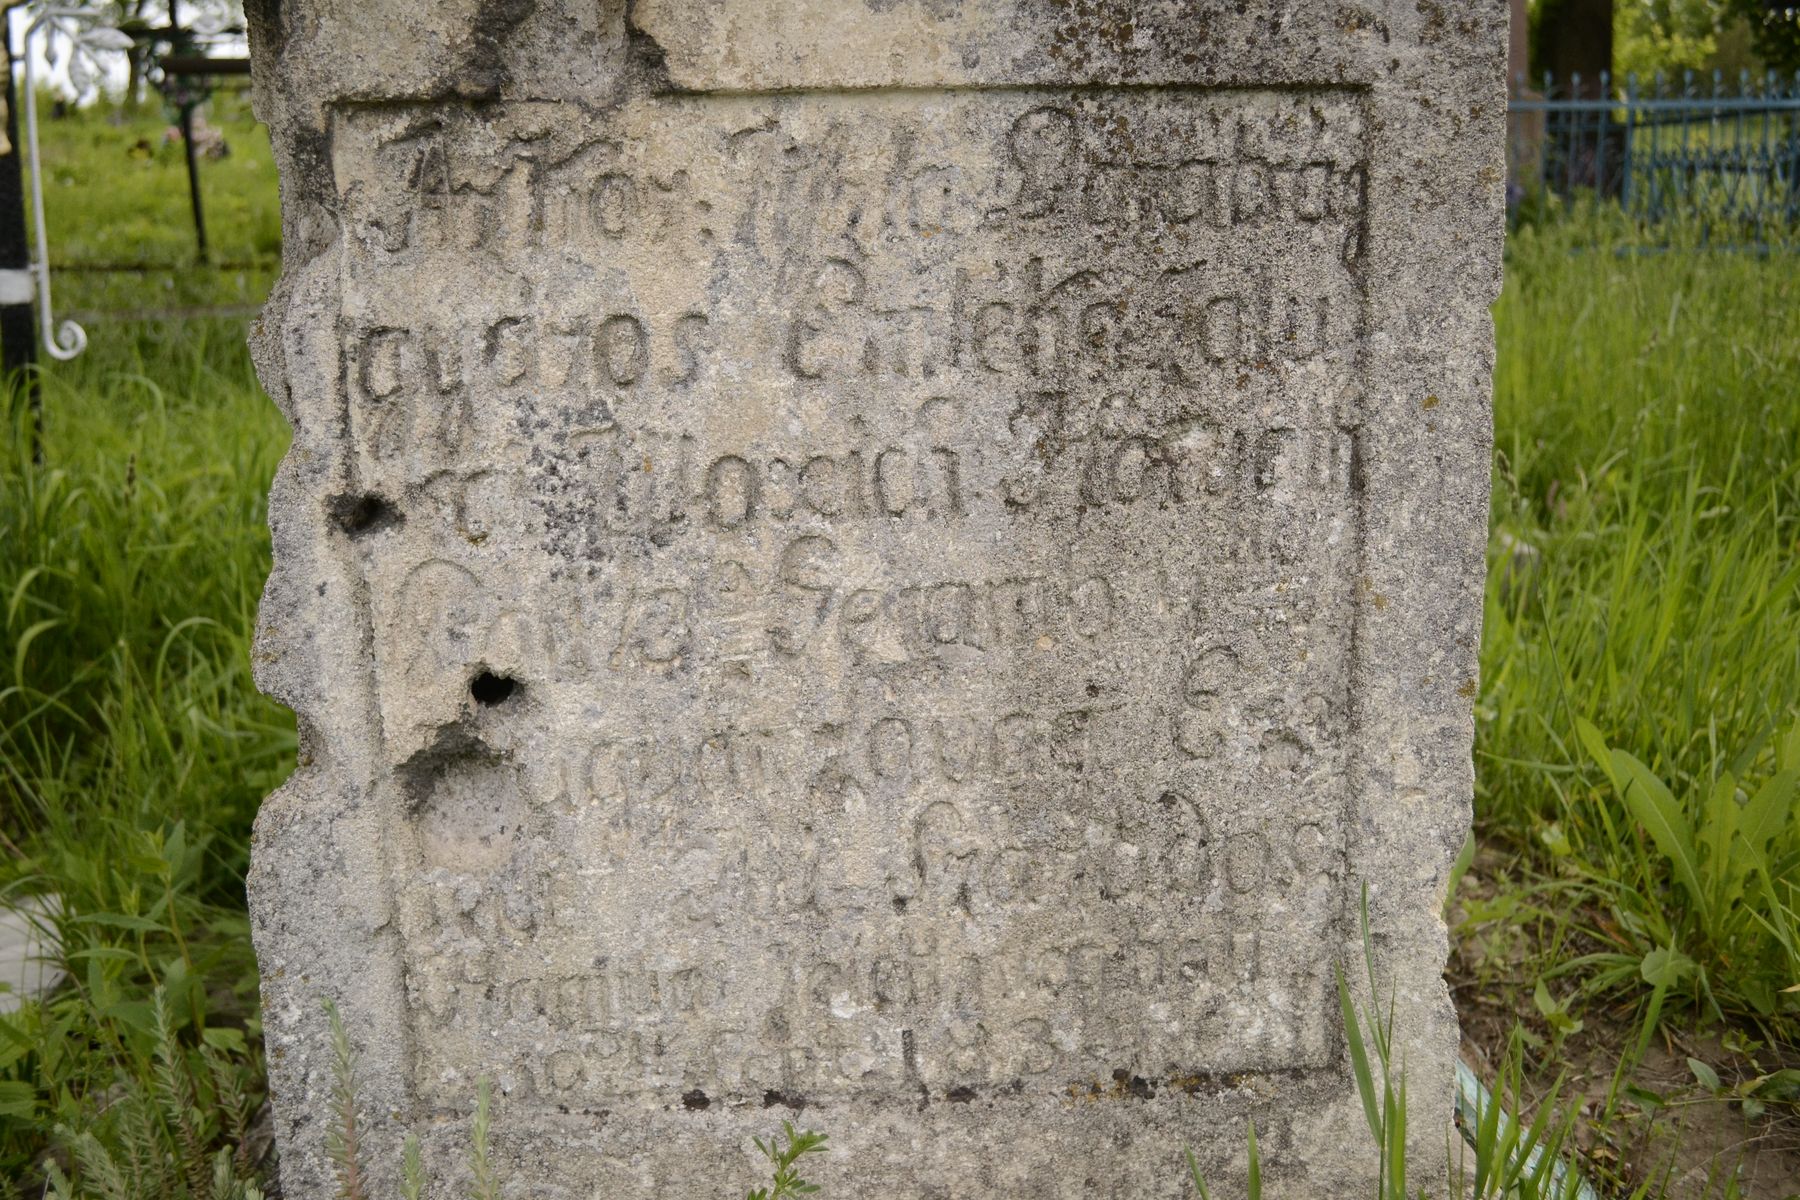 Inscription from the tombstone of Paulus Waxich Horwath, Smykowce cemetery